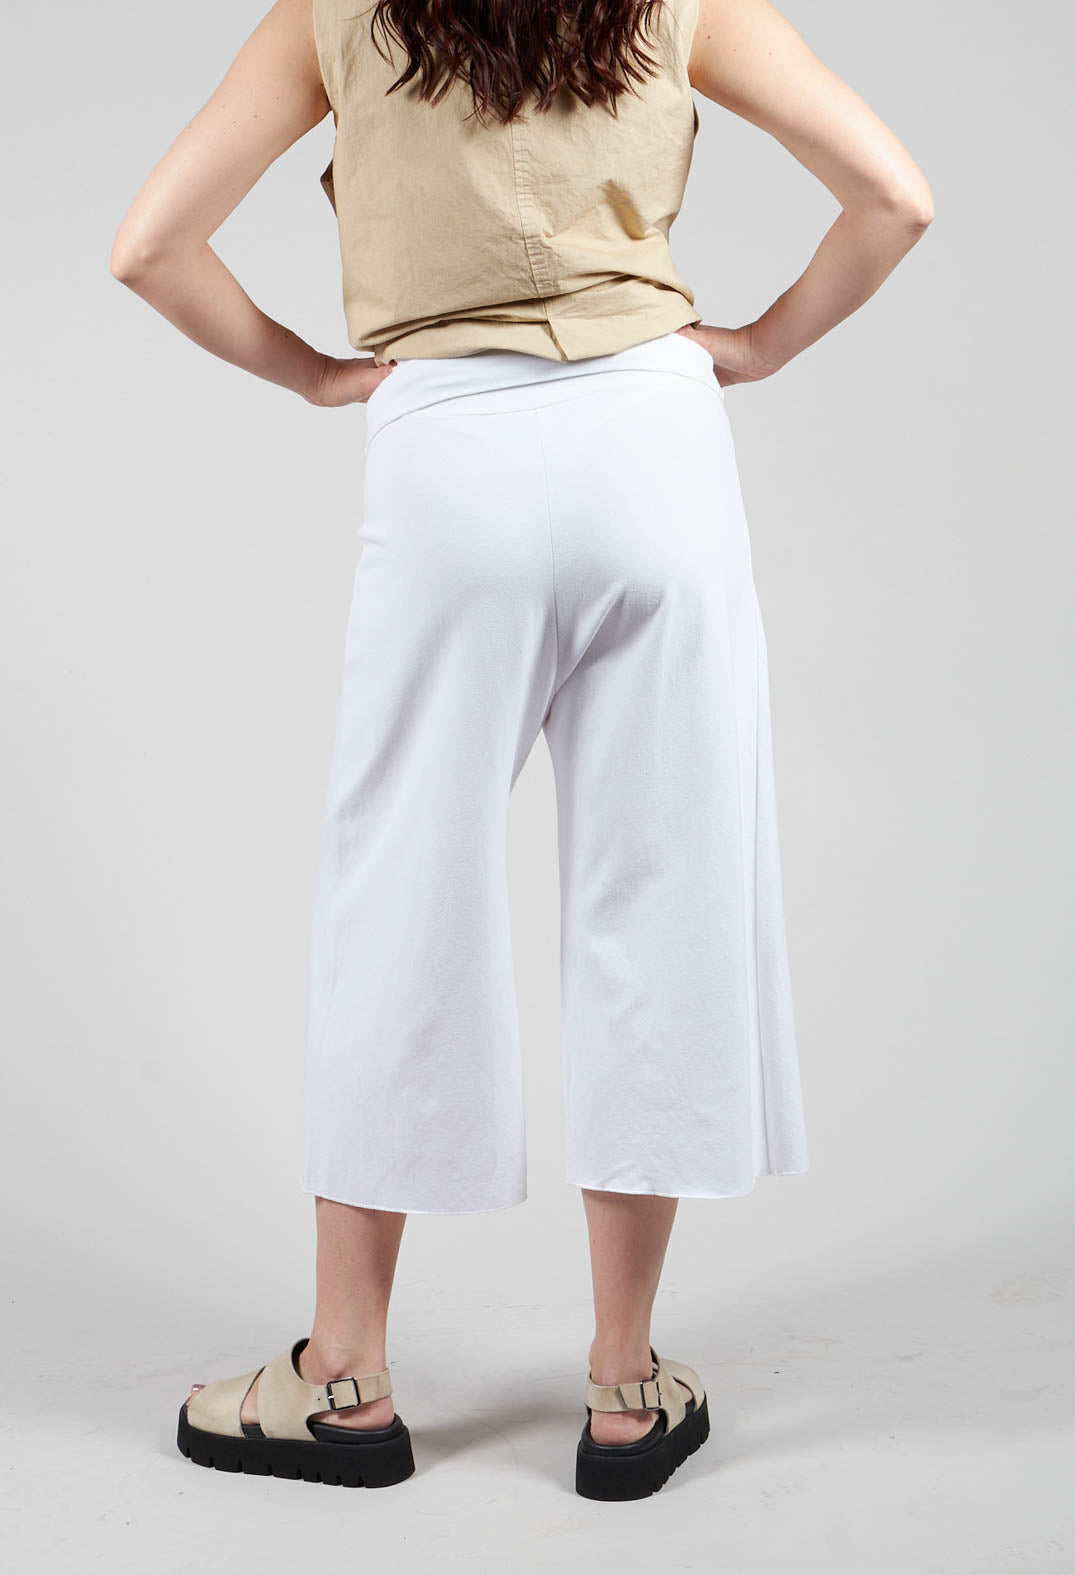 Easy Fit Trousers Eco in Milk